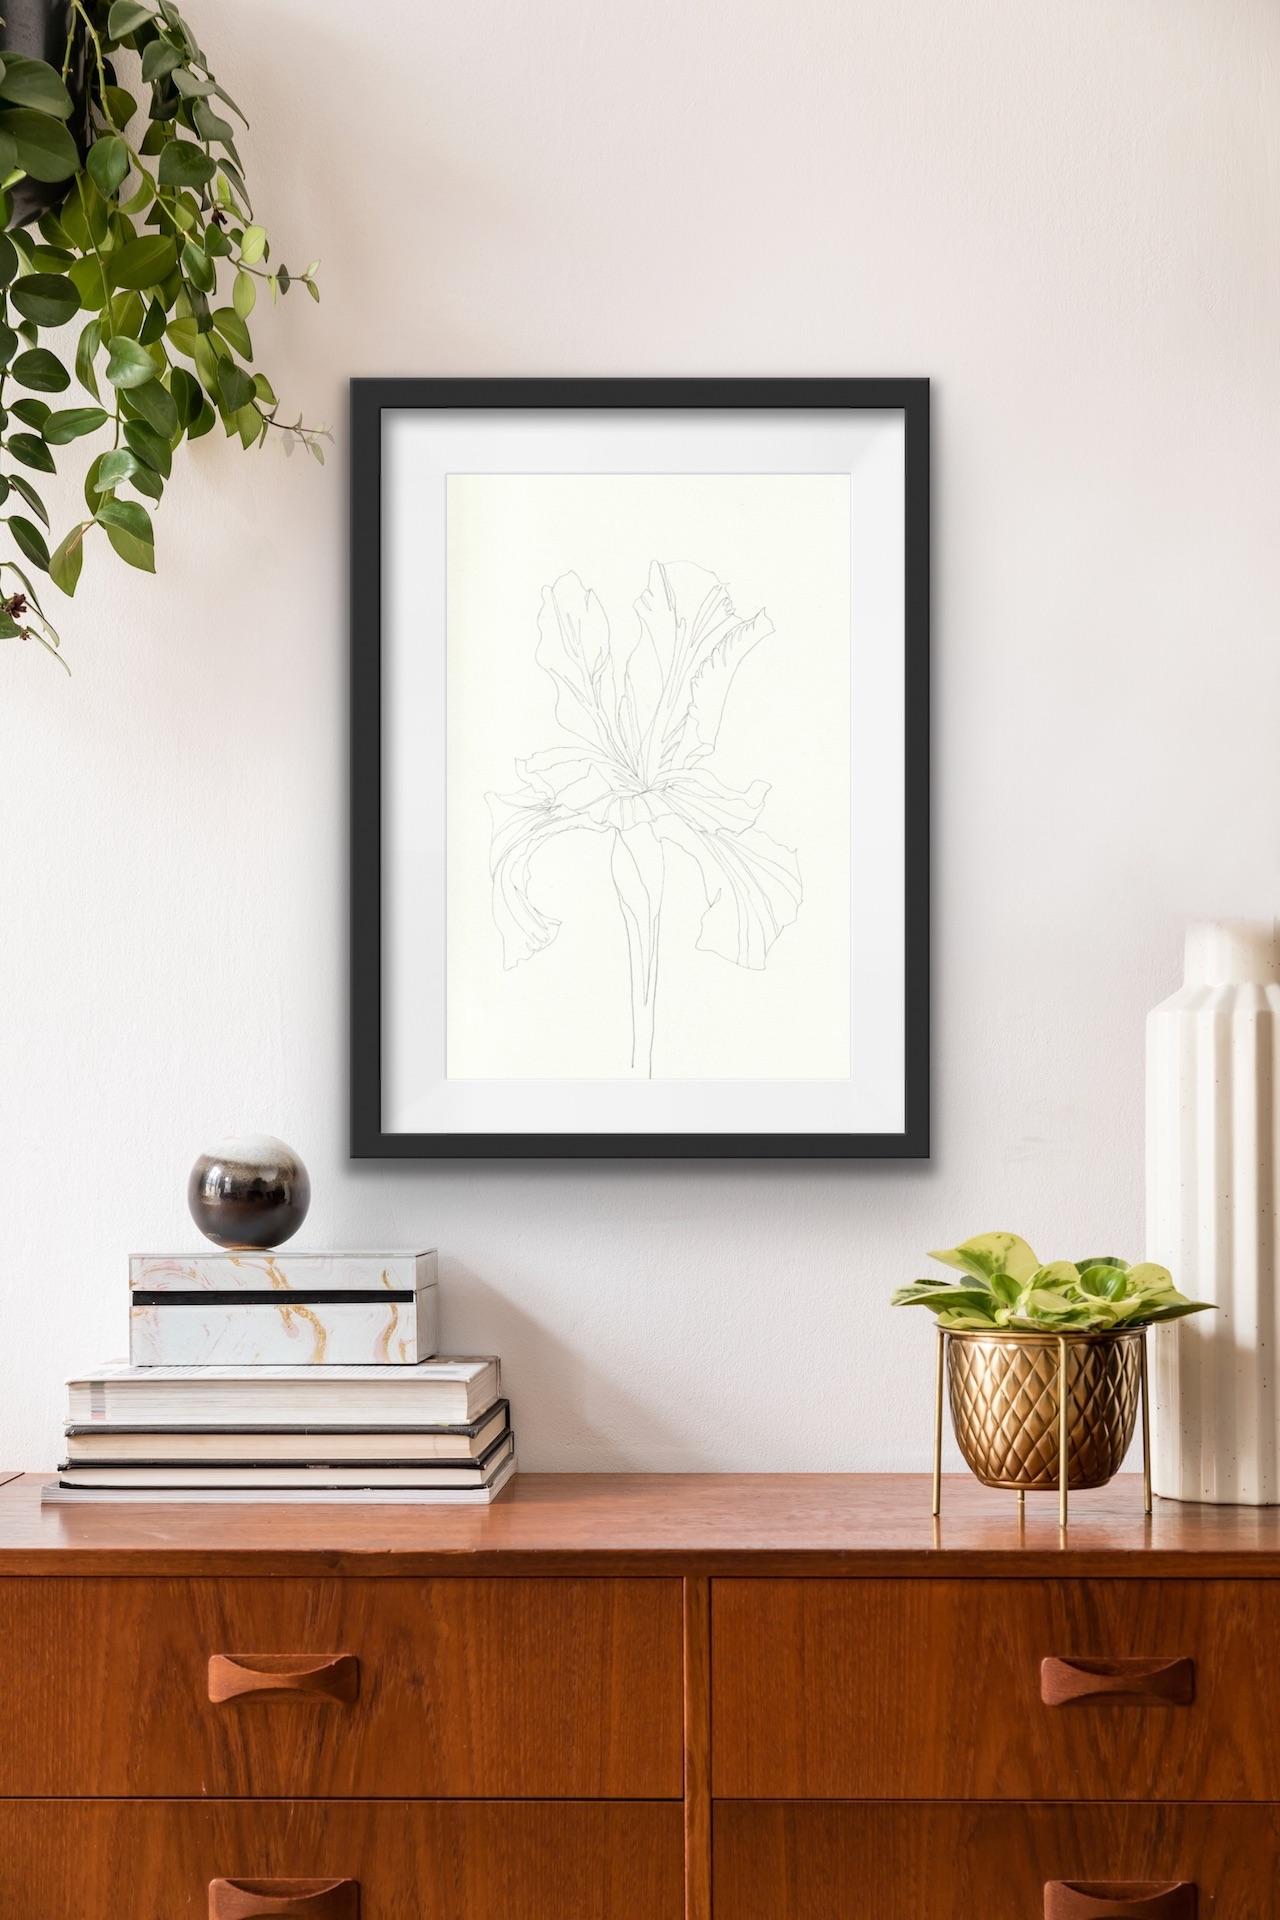 Ellen Williams
Iris I
Original drawing
Pencil on 150gsm Paper
Image Size: H 30cm x W 20cm
Sold Unframed
Please note that in situ images are purely an indication of how a piece may look.

This drawing is one in a series of botanical line drawings